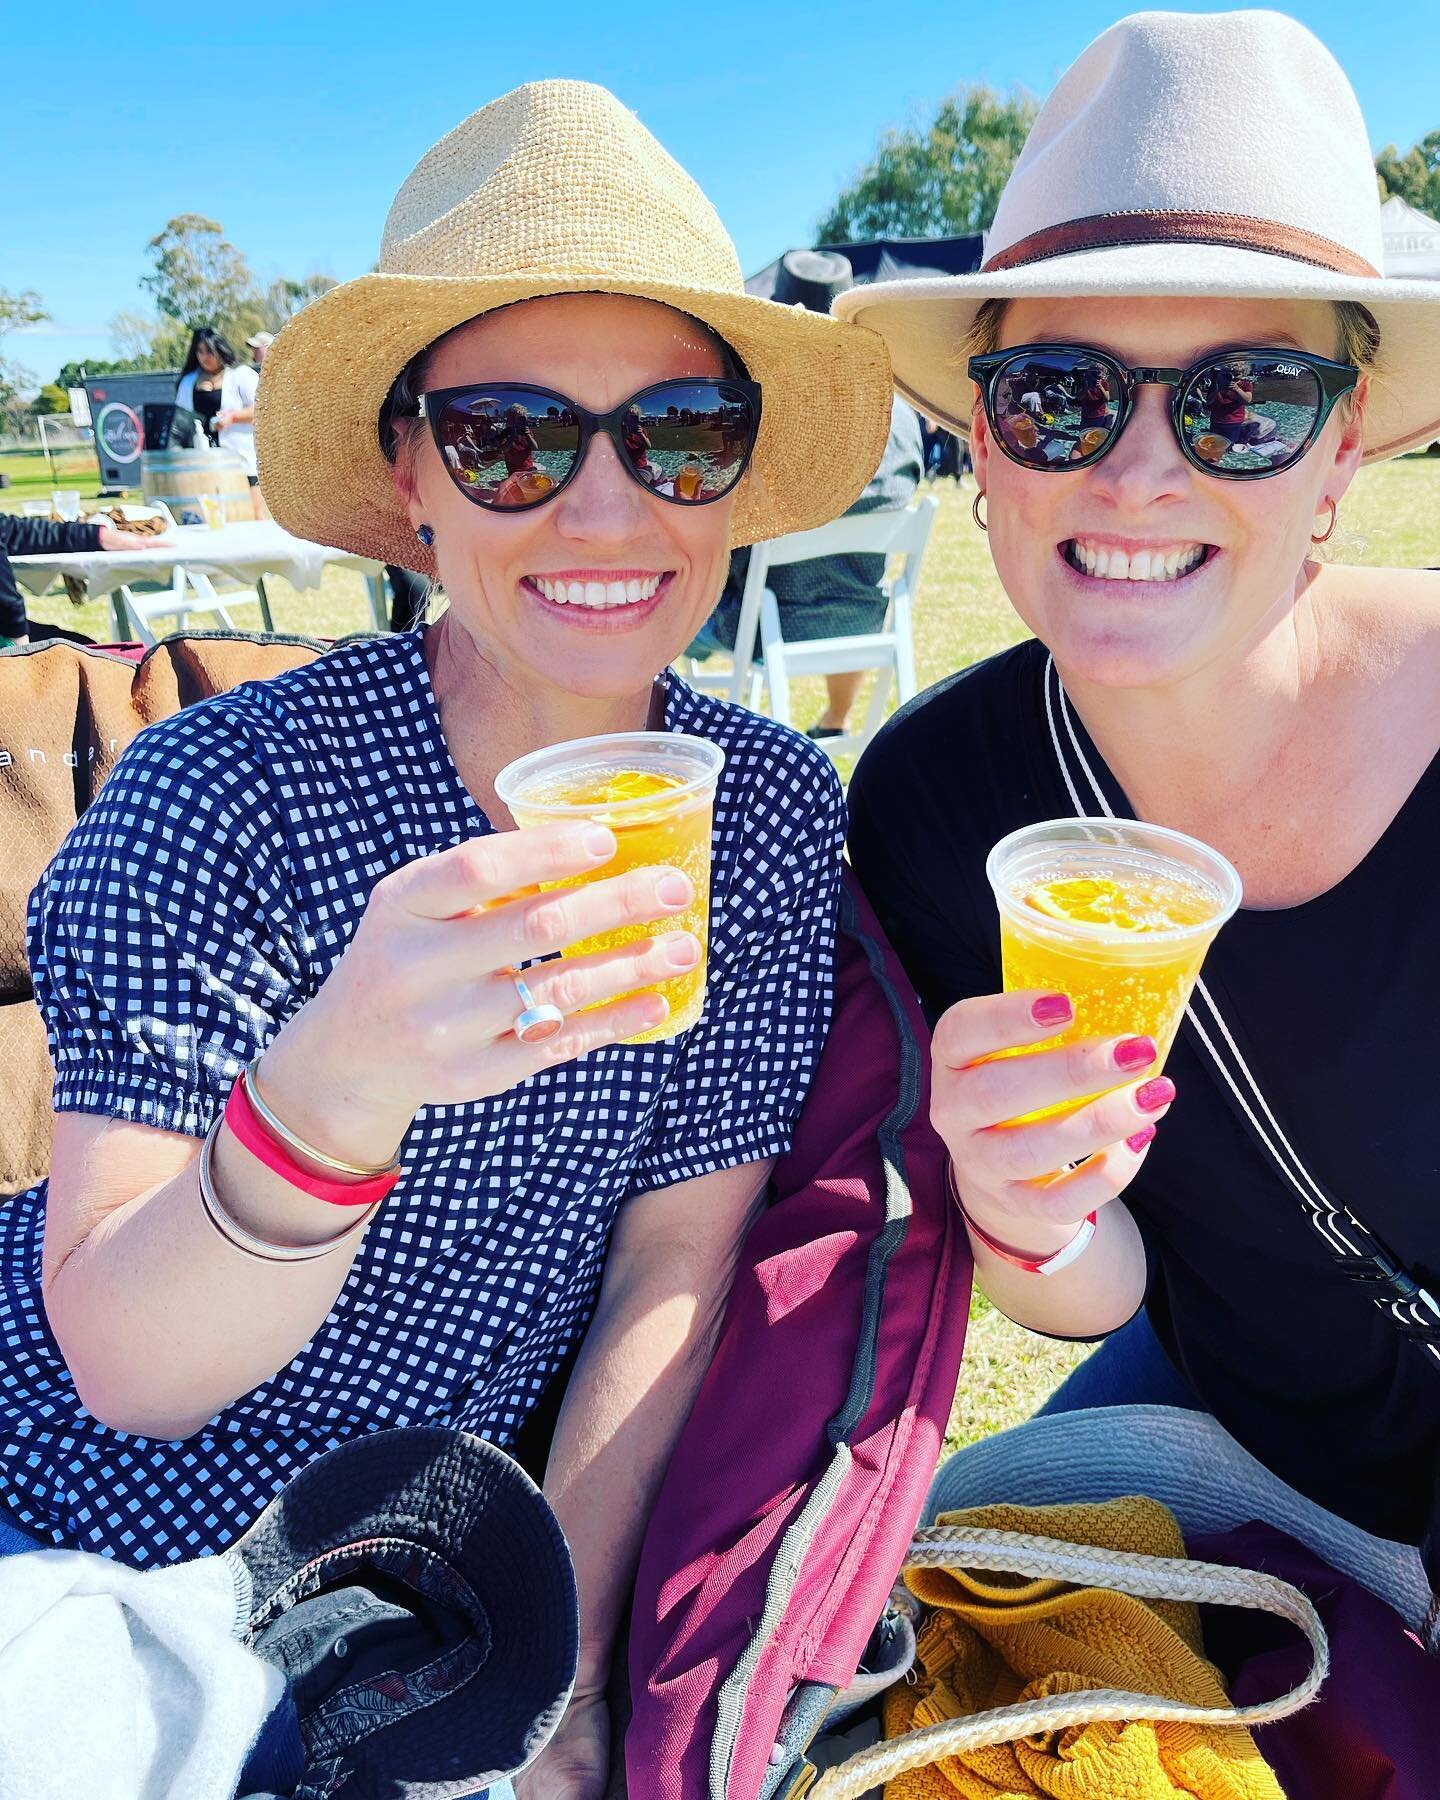 Suns out, fun&rsquo;s out!@griffithitalianfestival with @brooke.brink 
Nice to be enjoying an event for a change.